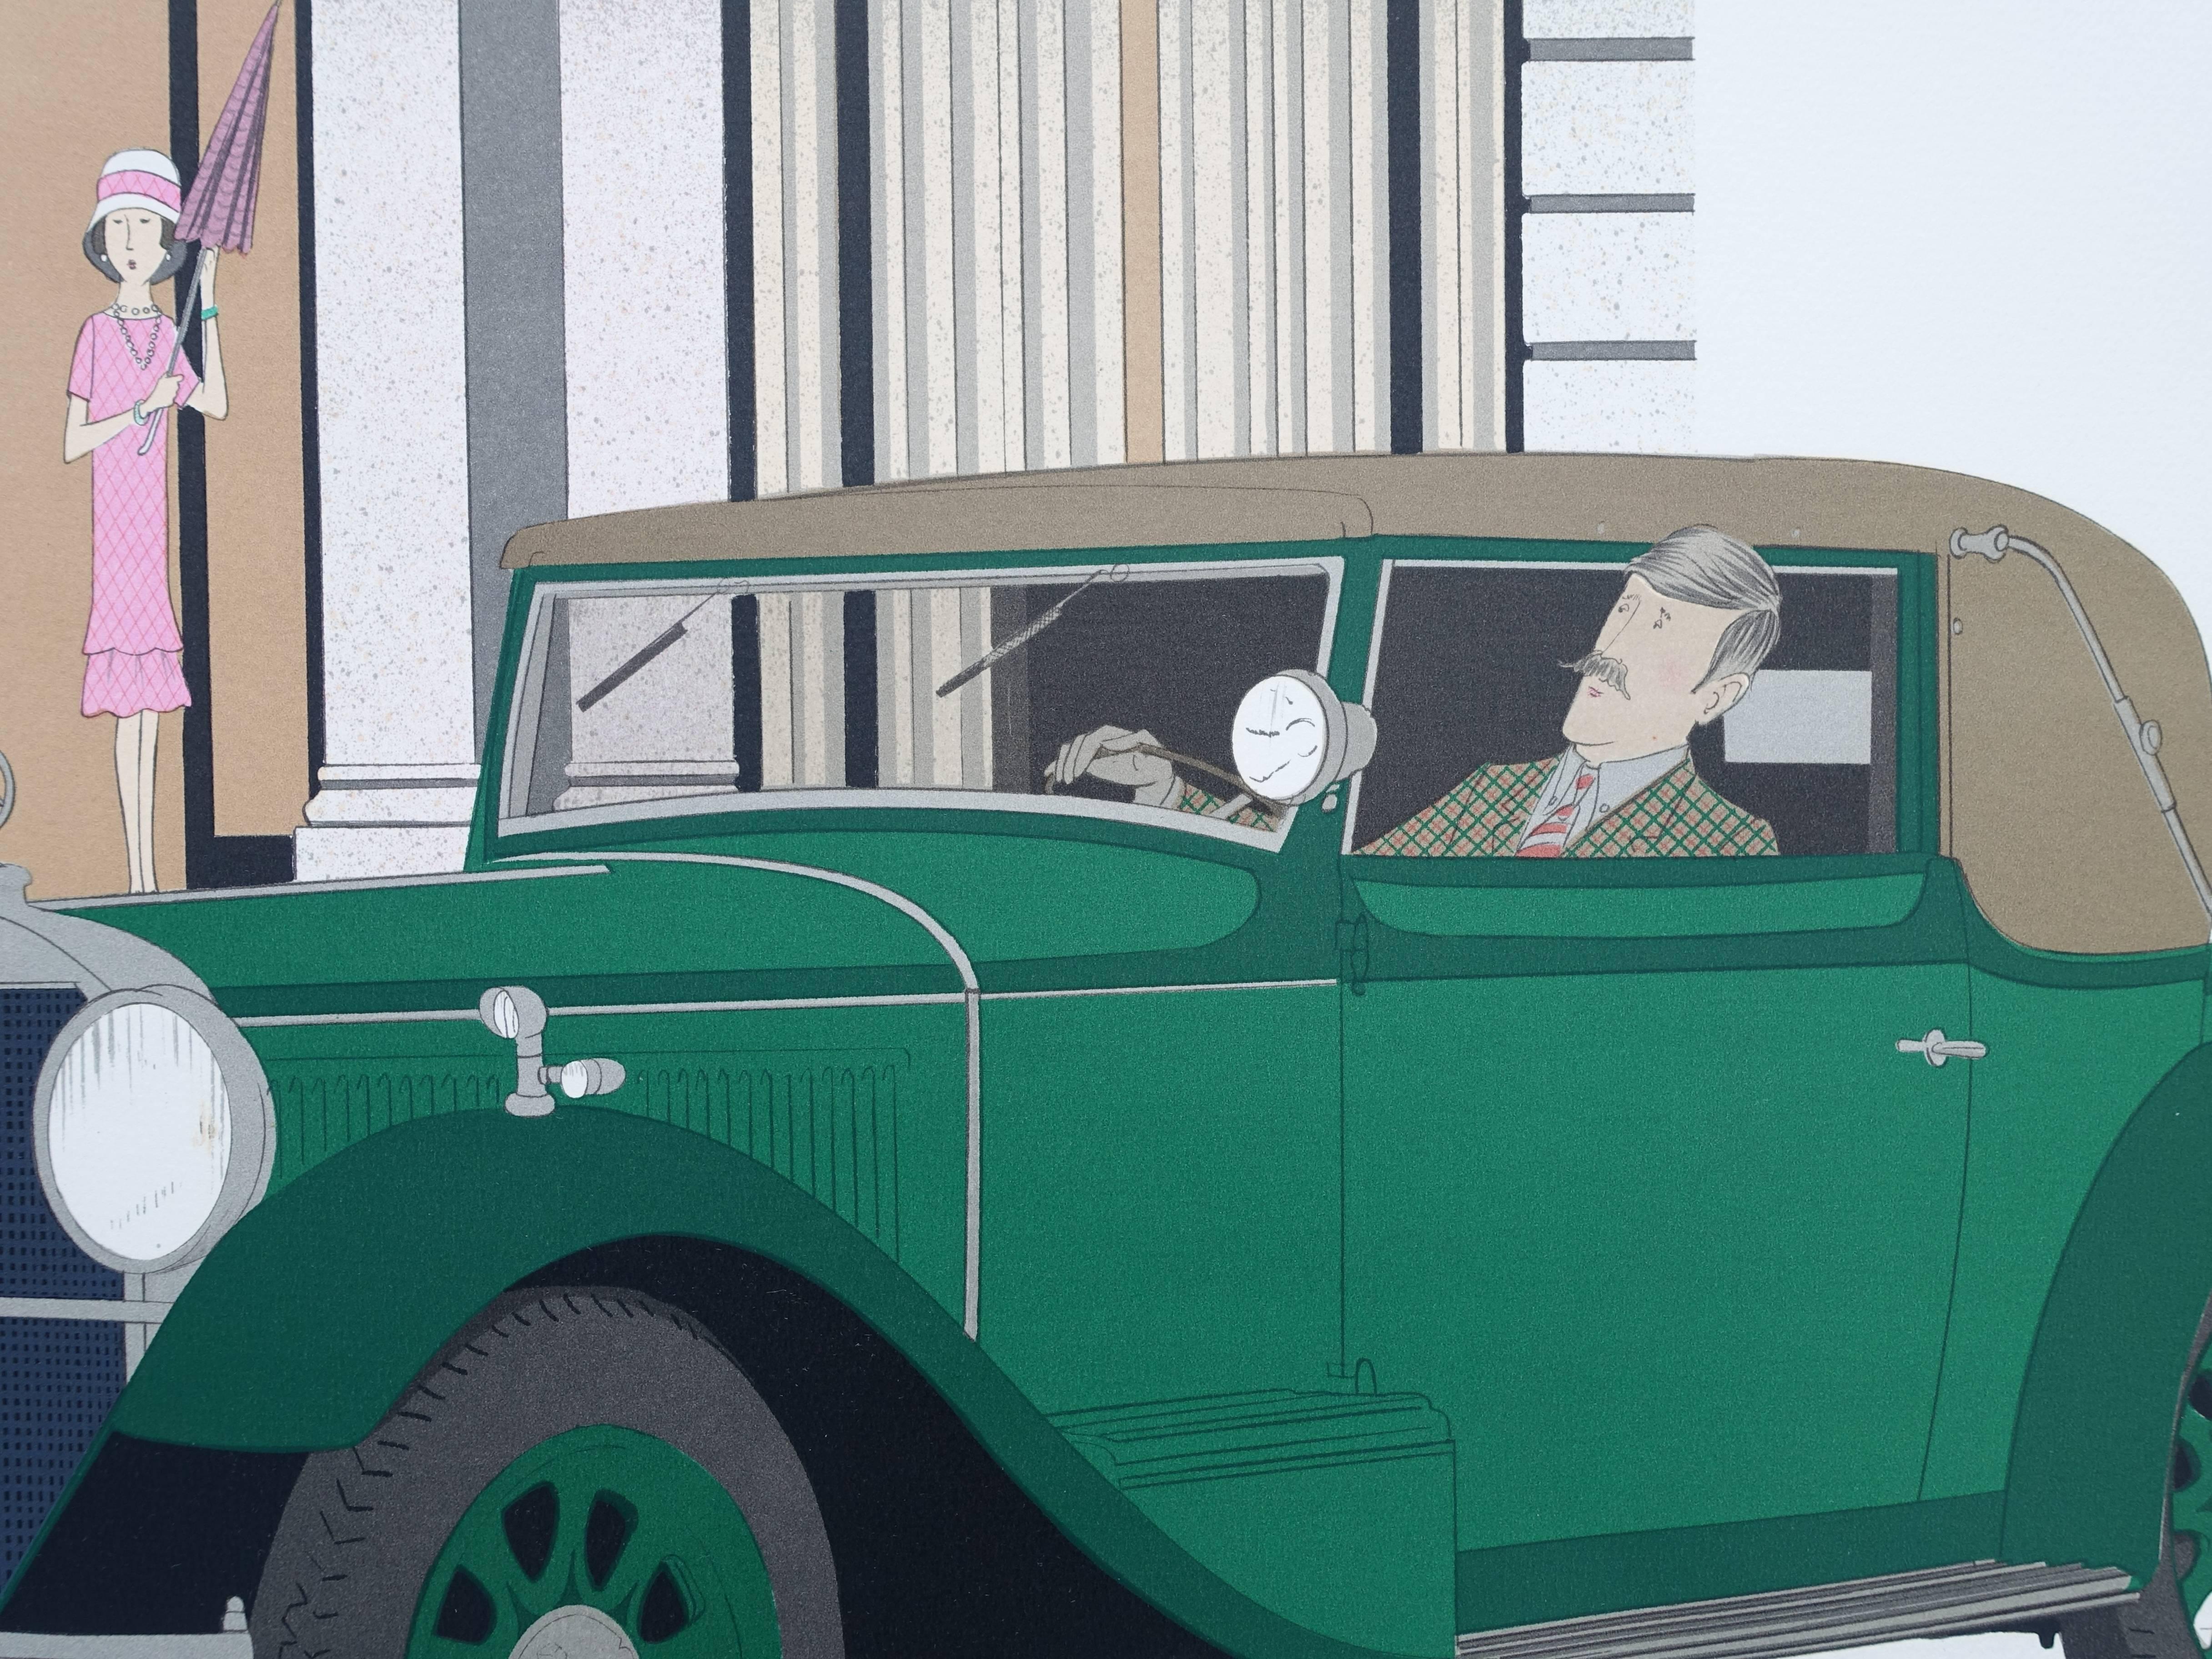 Hotel : Old Mercedes and Hotel de Paris - Signed lithograph - 115ex - Gray Figurative Print by Denis Paul Noyer